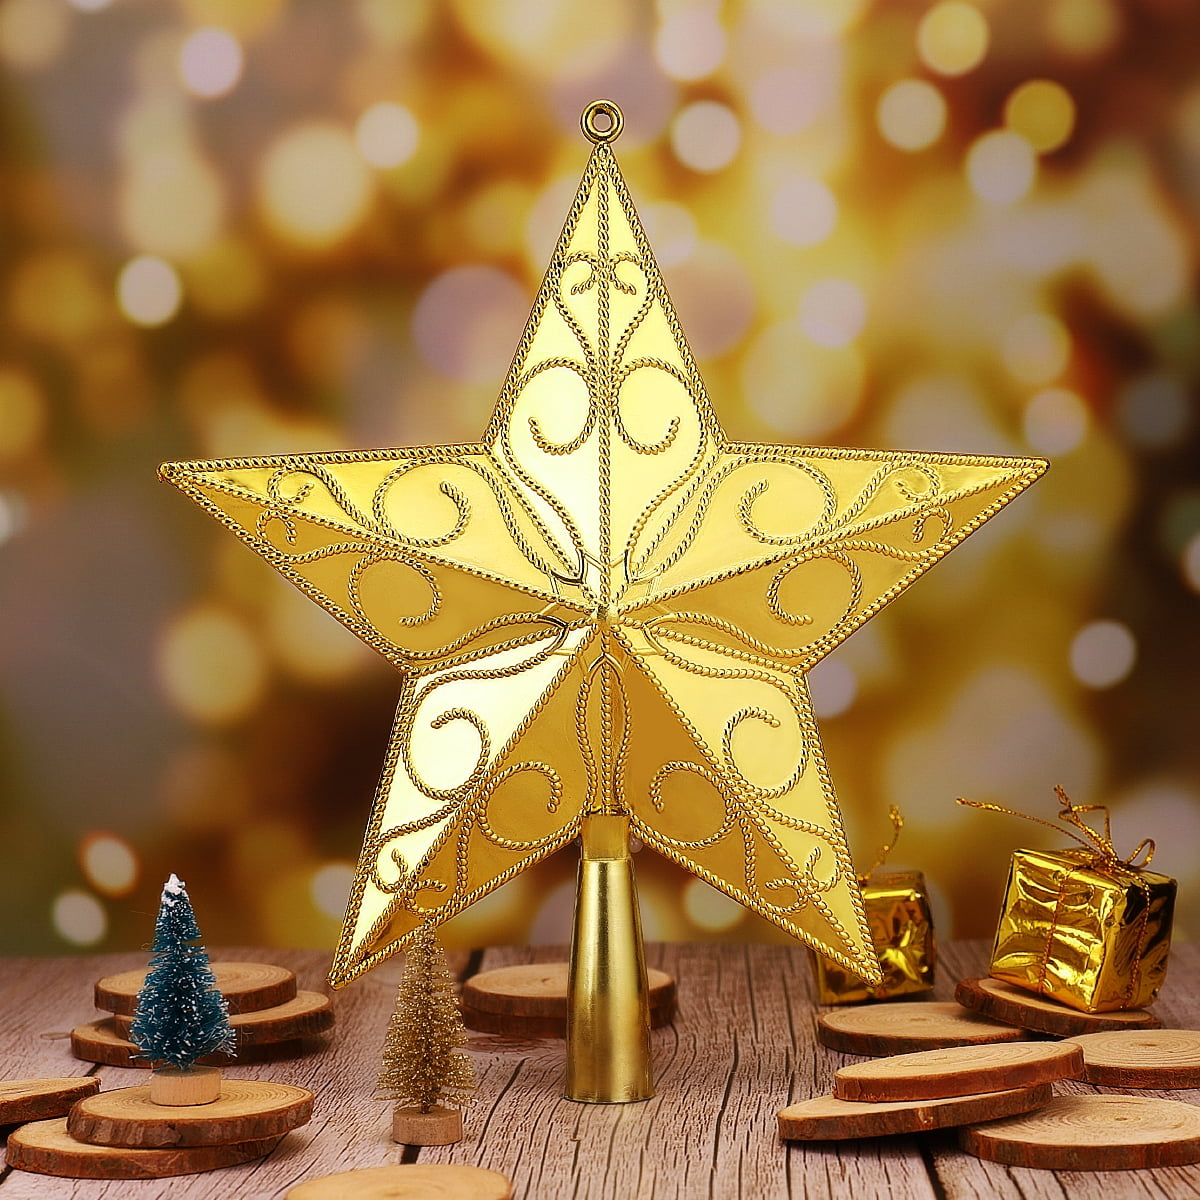 Winwinfly 1 Pcs 20cm Star Tree Topper Star Christmas Holiday Tree Topper Five Point Plastic Star Festival Treetop Decor for Home Party Golden